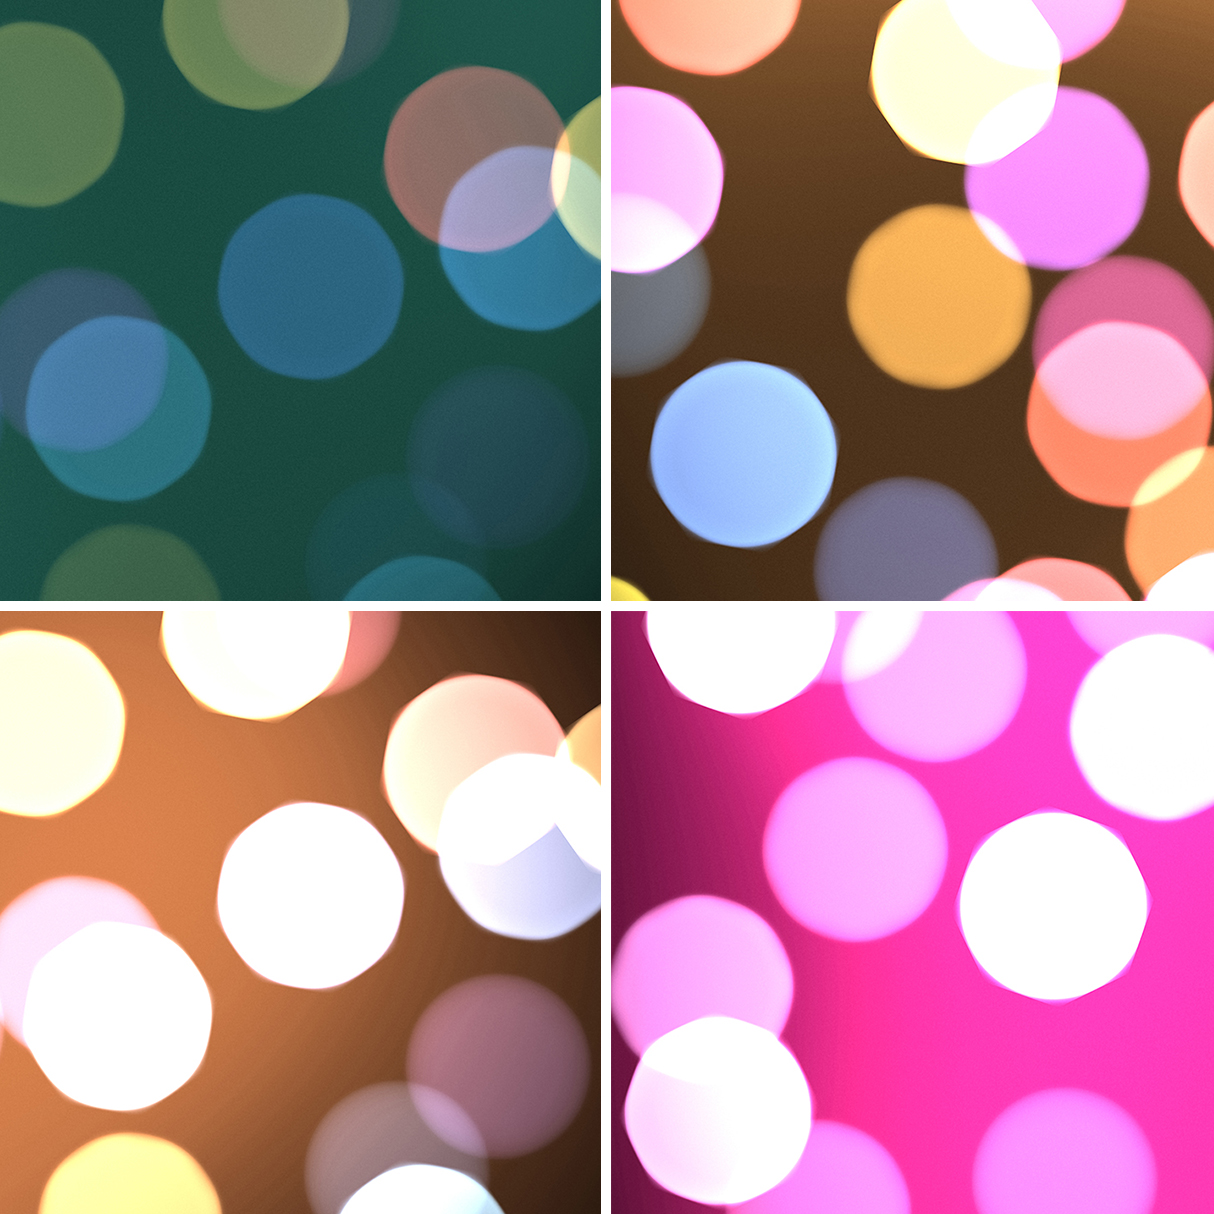 50 Bokeh Pro Backgrounds Samples Preview – Part 5